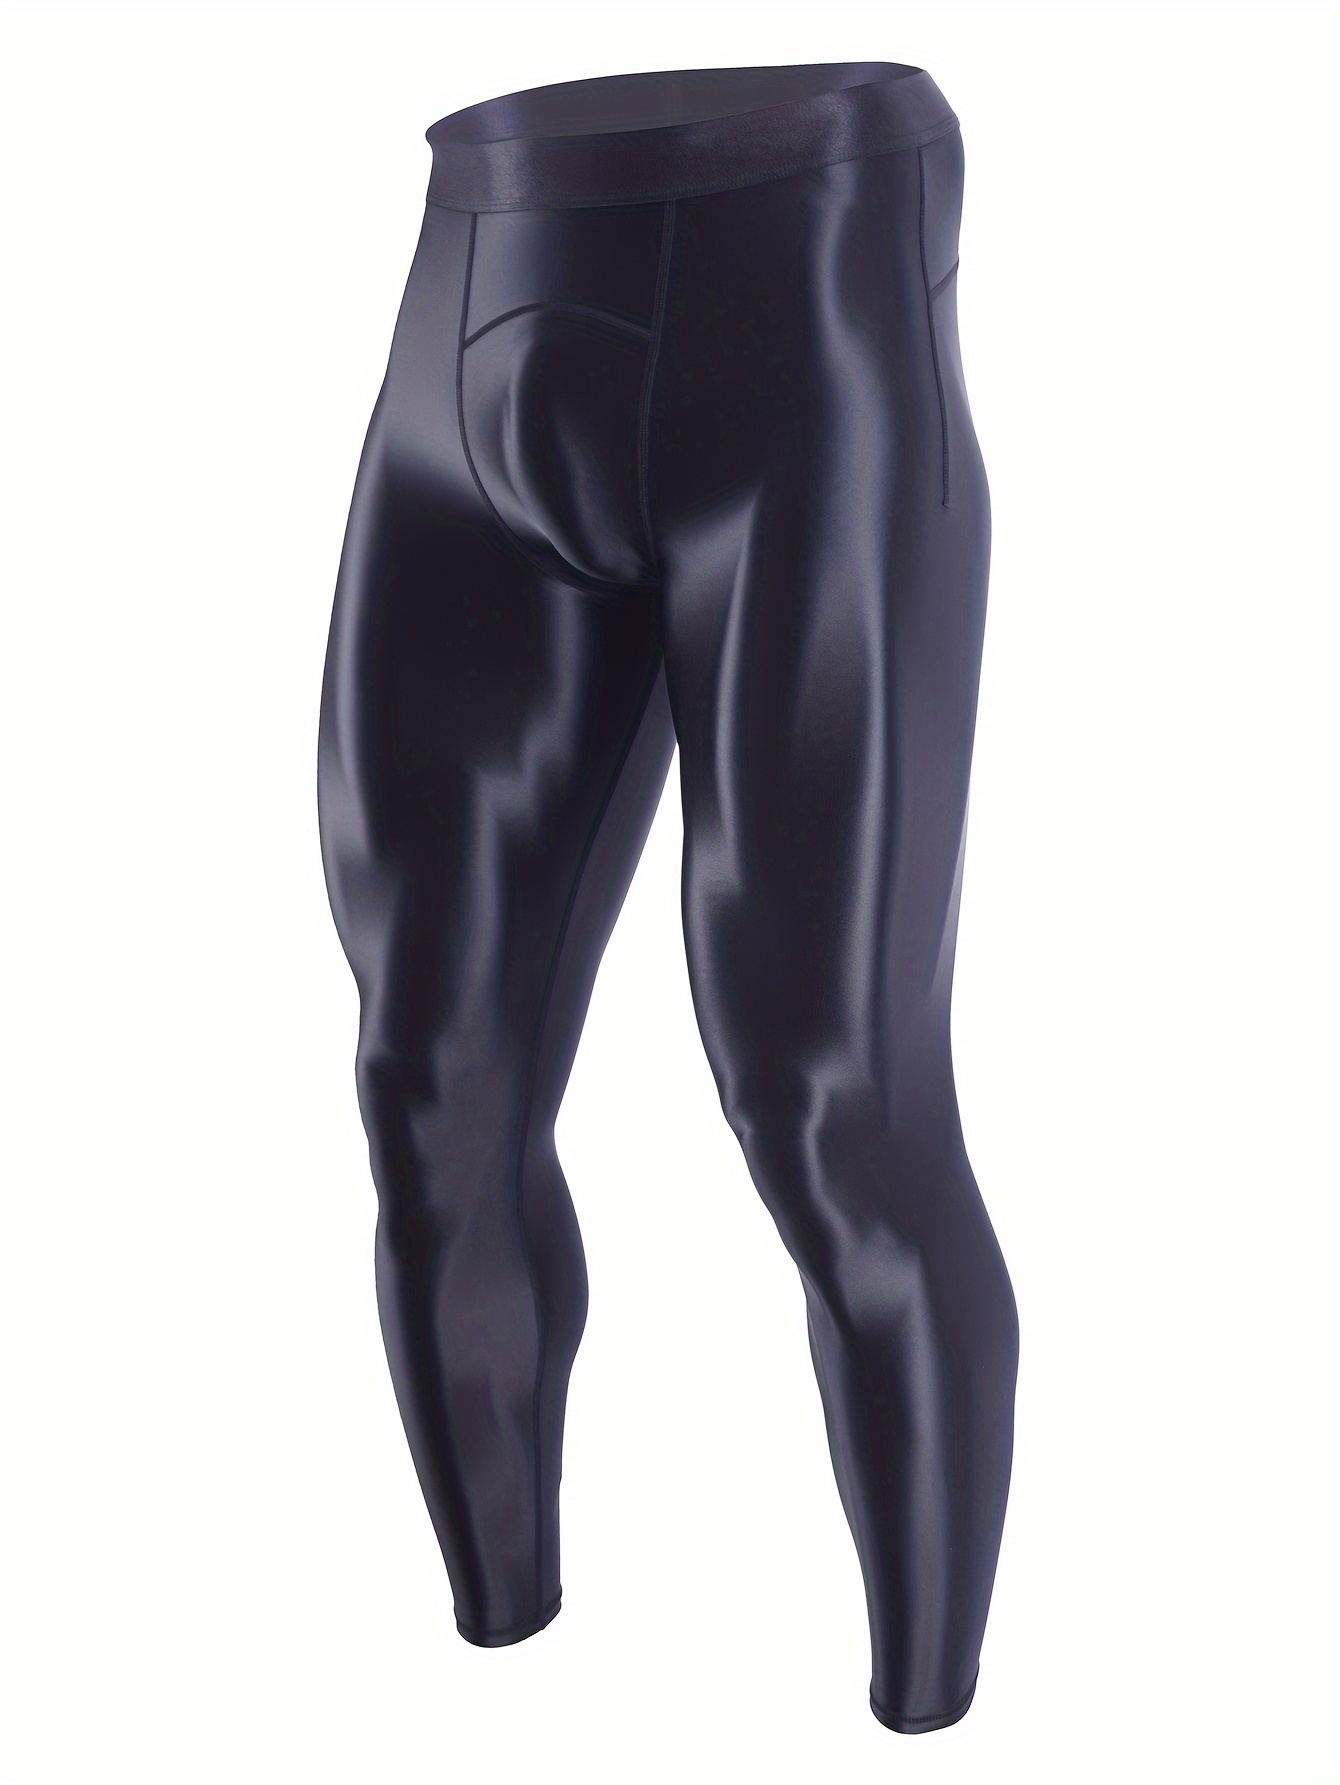 Men's Oil Shiny Compression Pants Nylon Stretchy Smooth Gym Workout  Leggings Tights